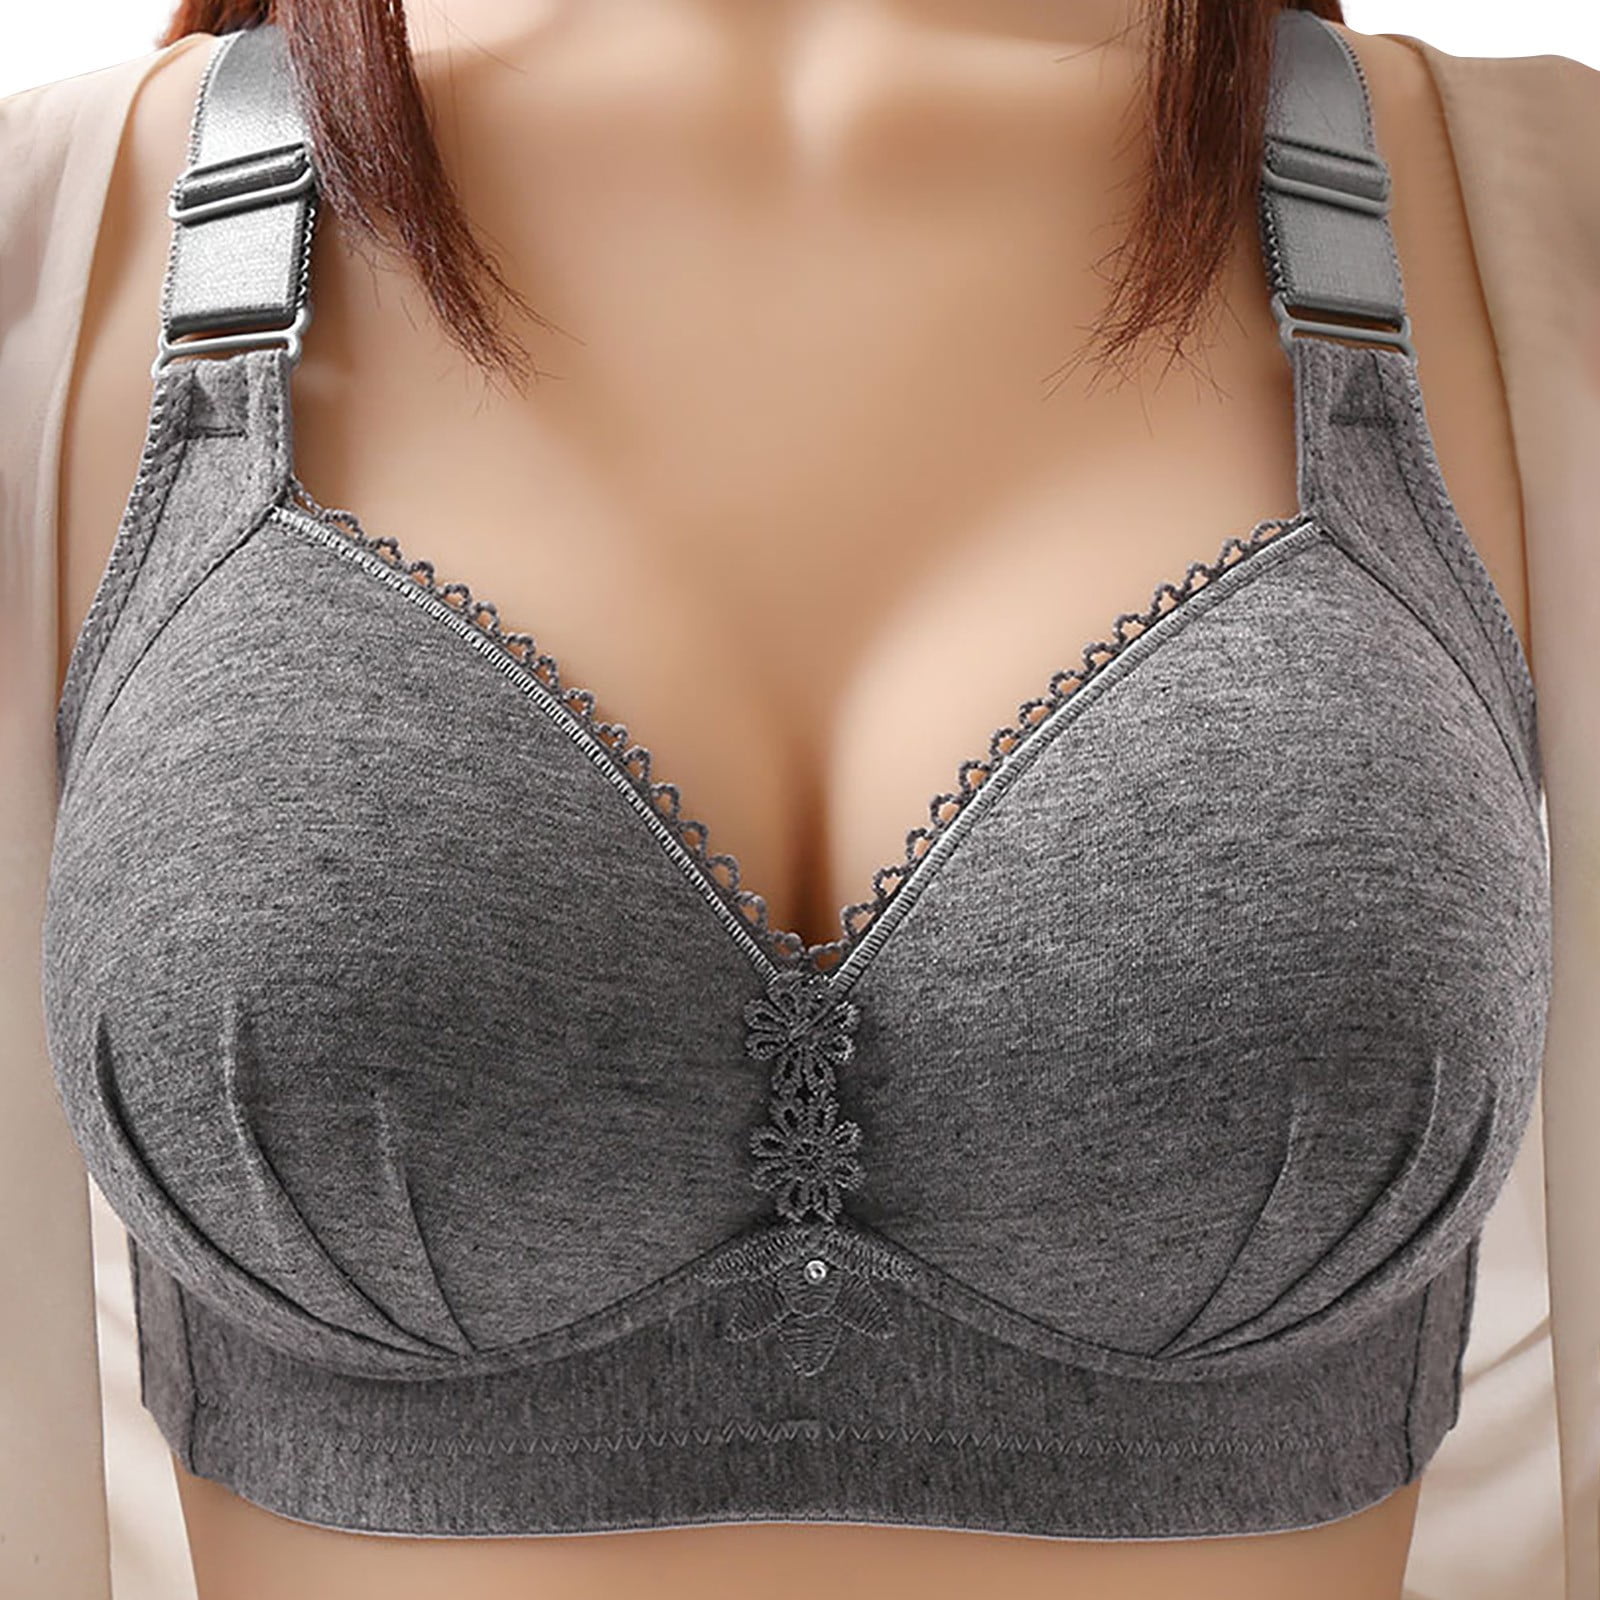 Back Smoothing Bras for Women Button Shapin Adjustable Shoulder Strap  Shapermint Bra for Womens Wirefree Black 42 